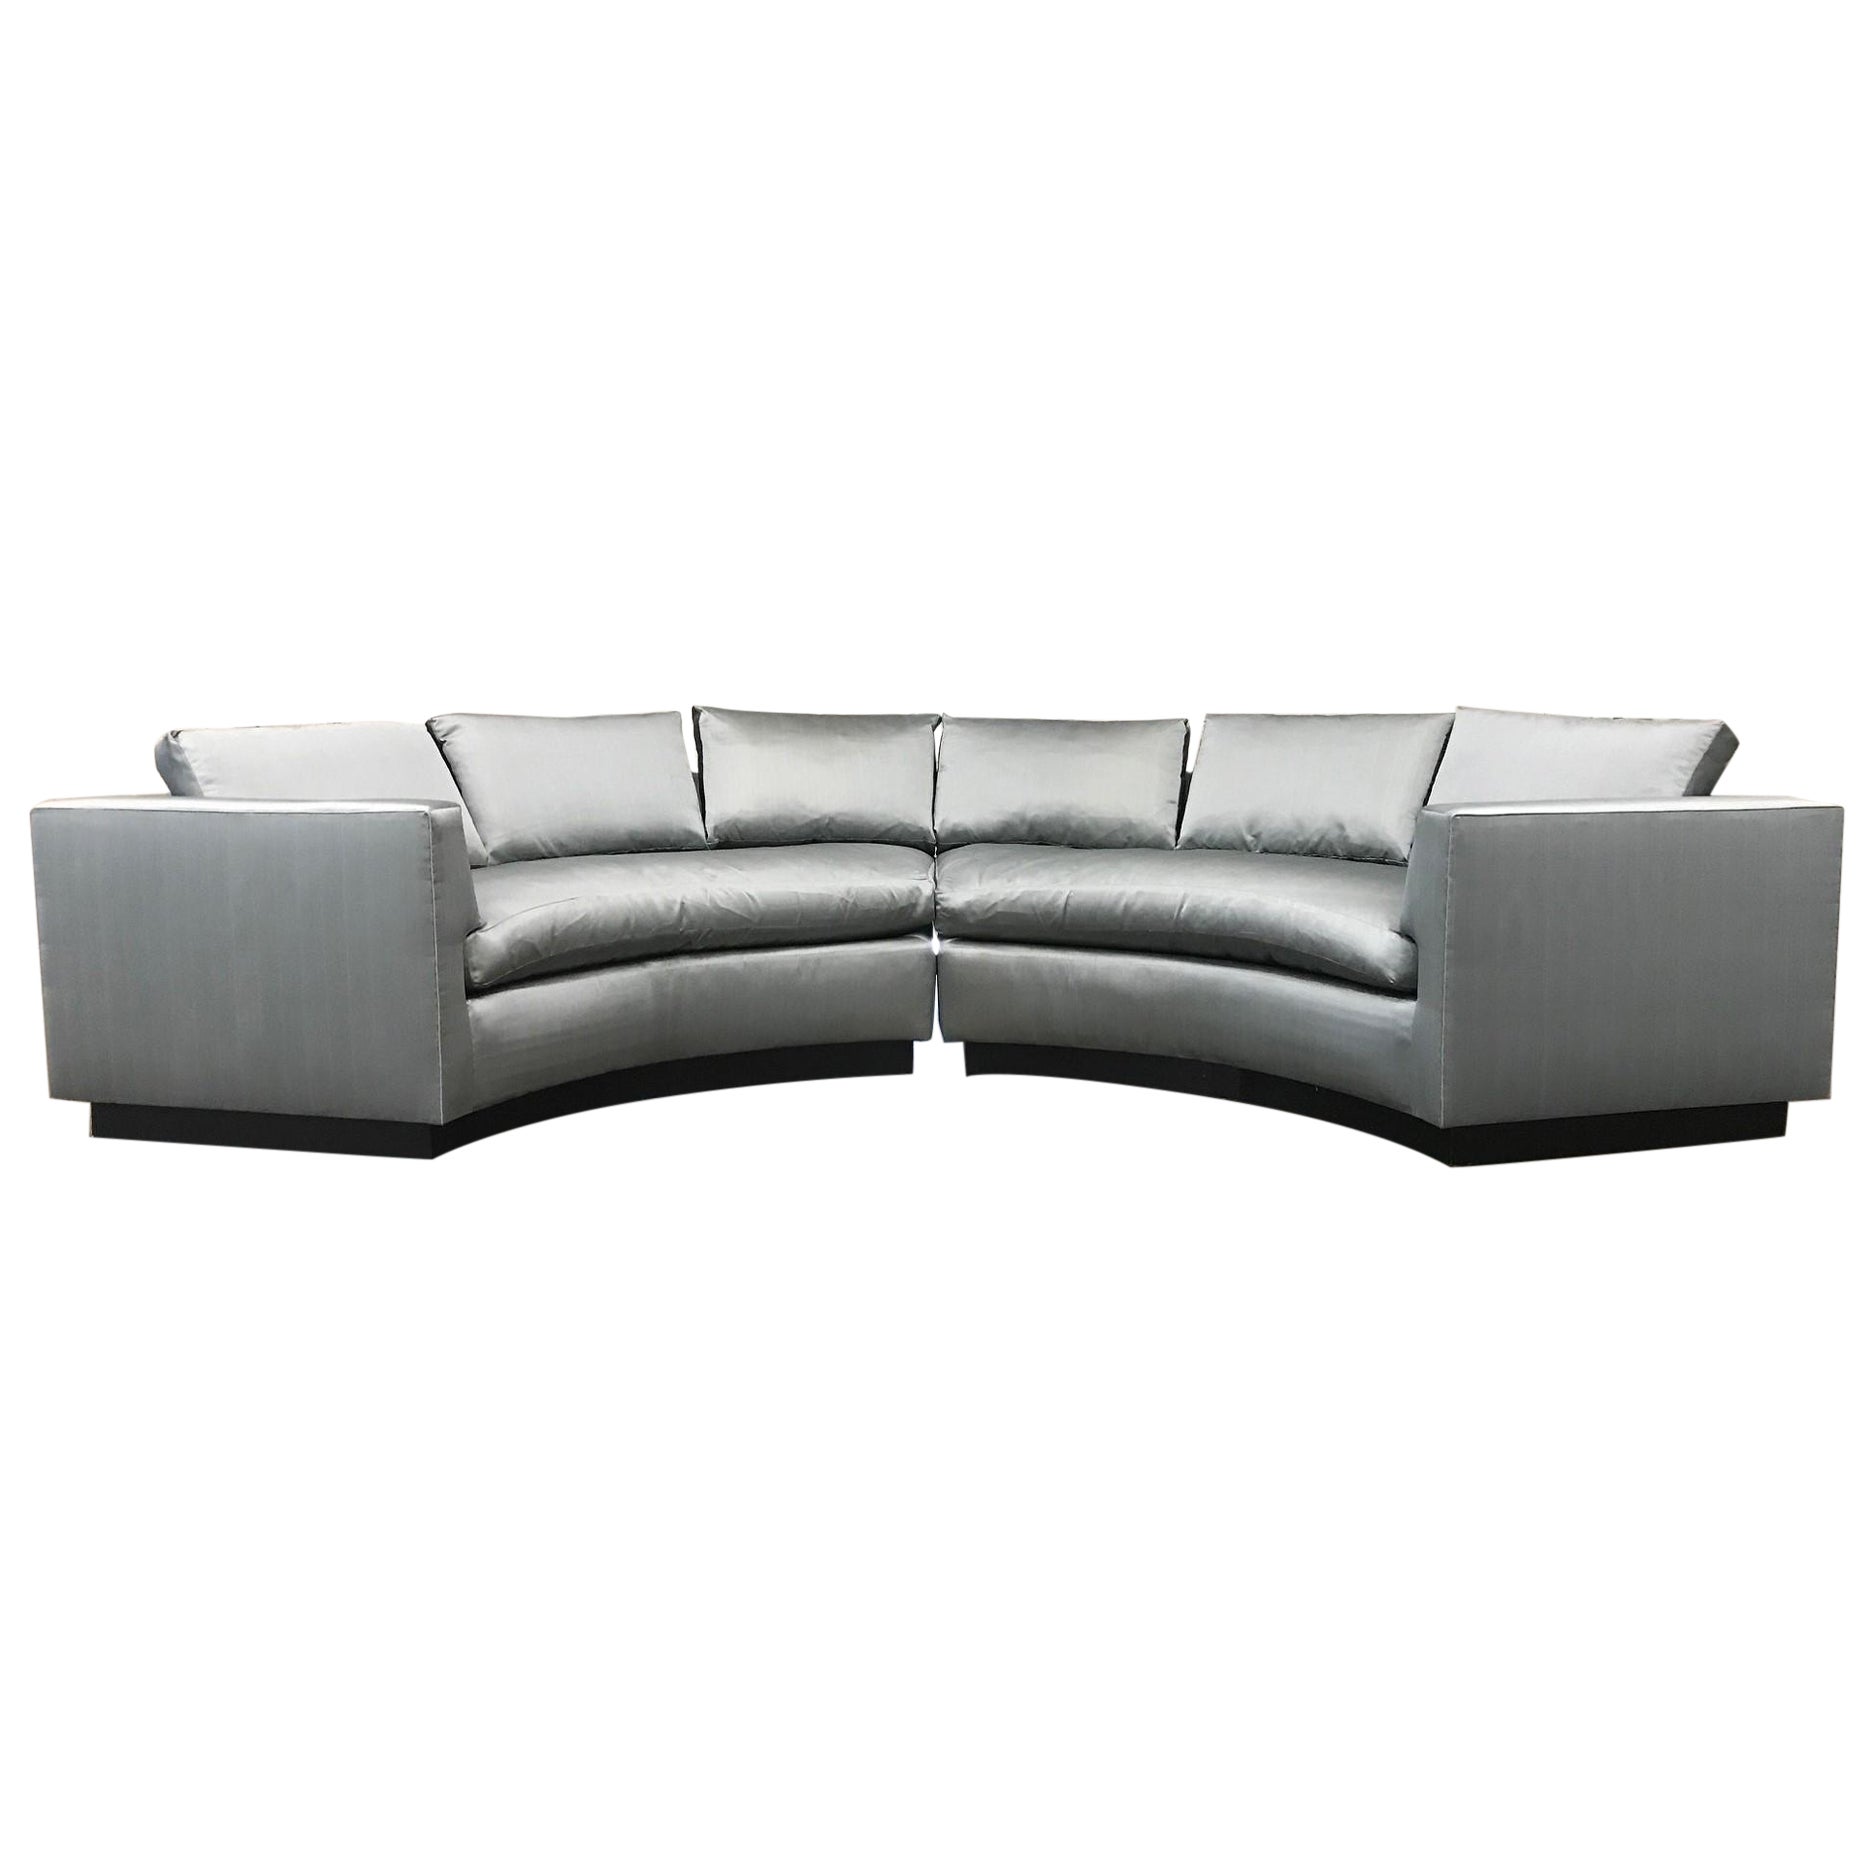 Two-Piece Sofa Sectional in Satin For Sale